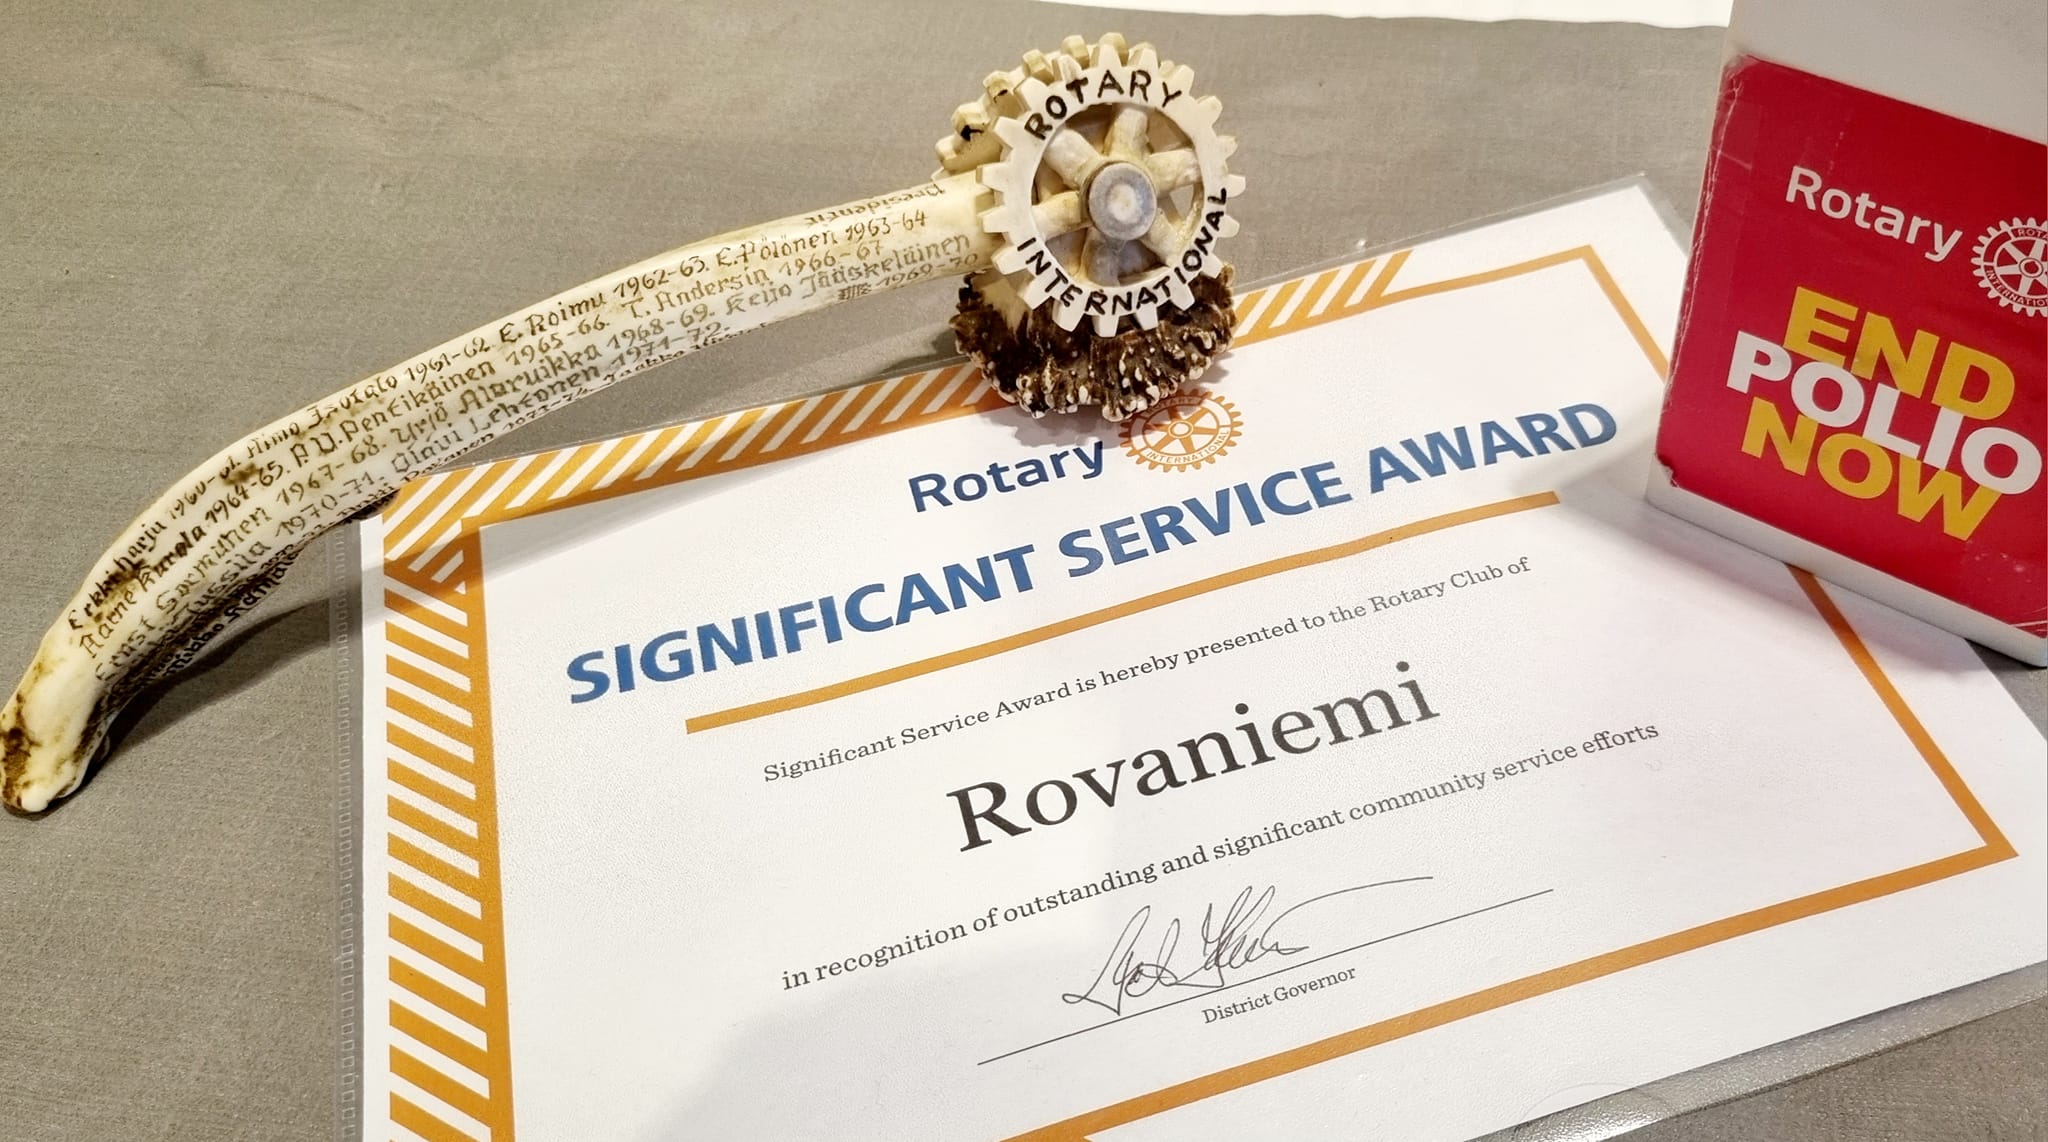 On October 16, 2023, Rovaniemi Rotary Club received an award for a significant service from district governor Petri Keränen in connection with the Northern Lights Wicket project. Next week, our project is to participate in the End Polio Now fundraiser.